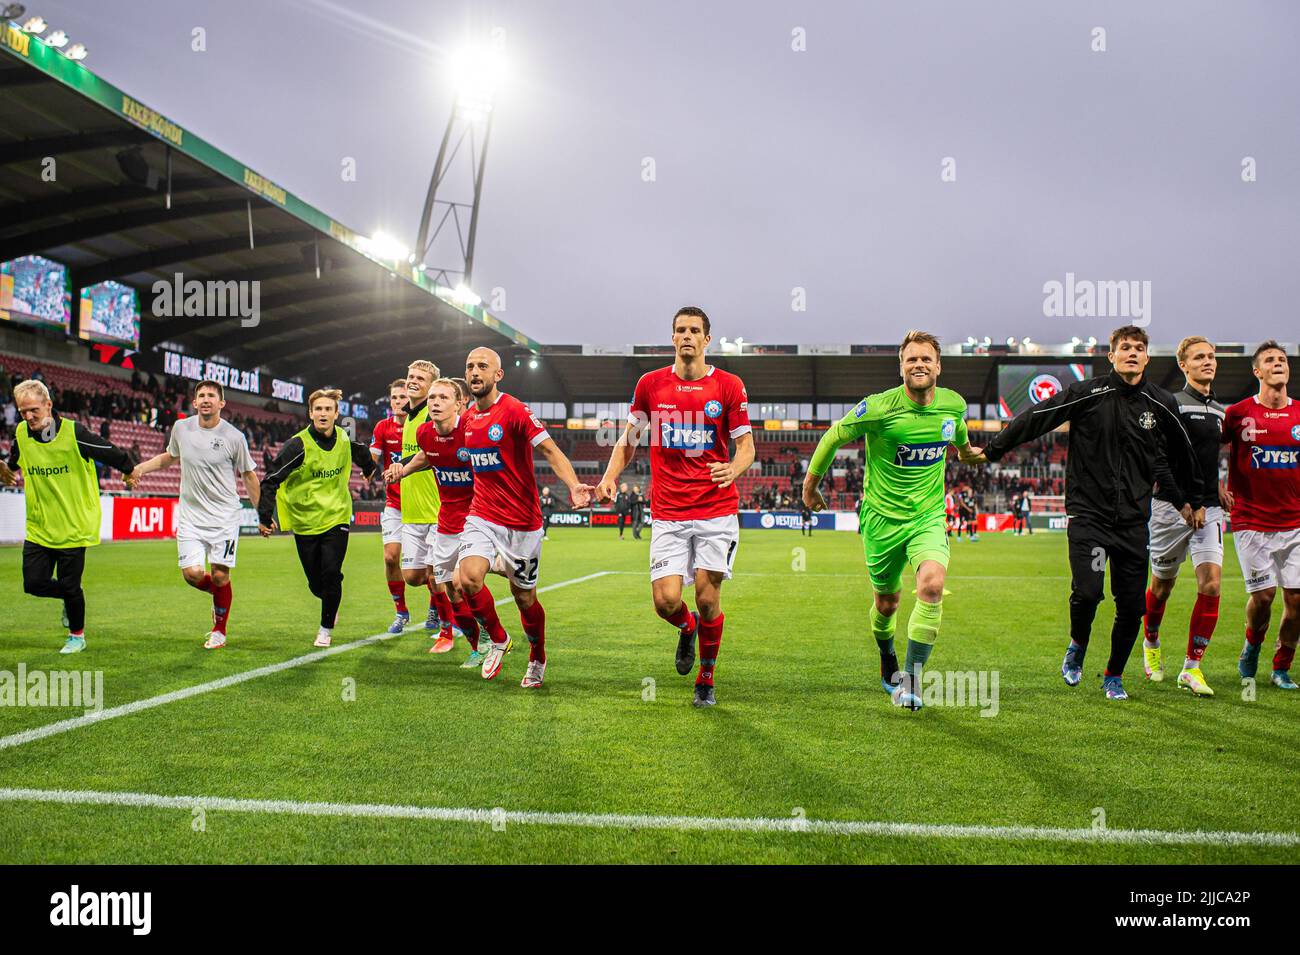 Herning, Denmark. 22nd, July 2022. The players of Silkeborg IF are celebrating the victory after the 3F Superliga match between FC Midtjylland and Silkeborg IF at MCH Arena in Herning. (Photo credit: Gonzales Photo - Morten Kjaer). Stock Photo